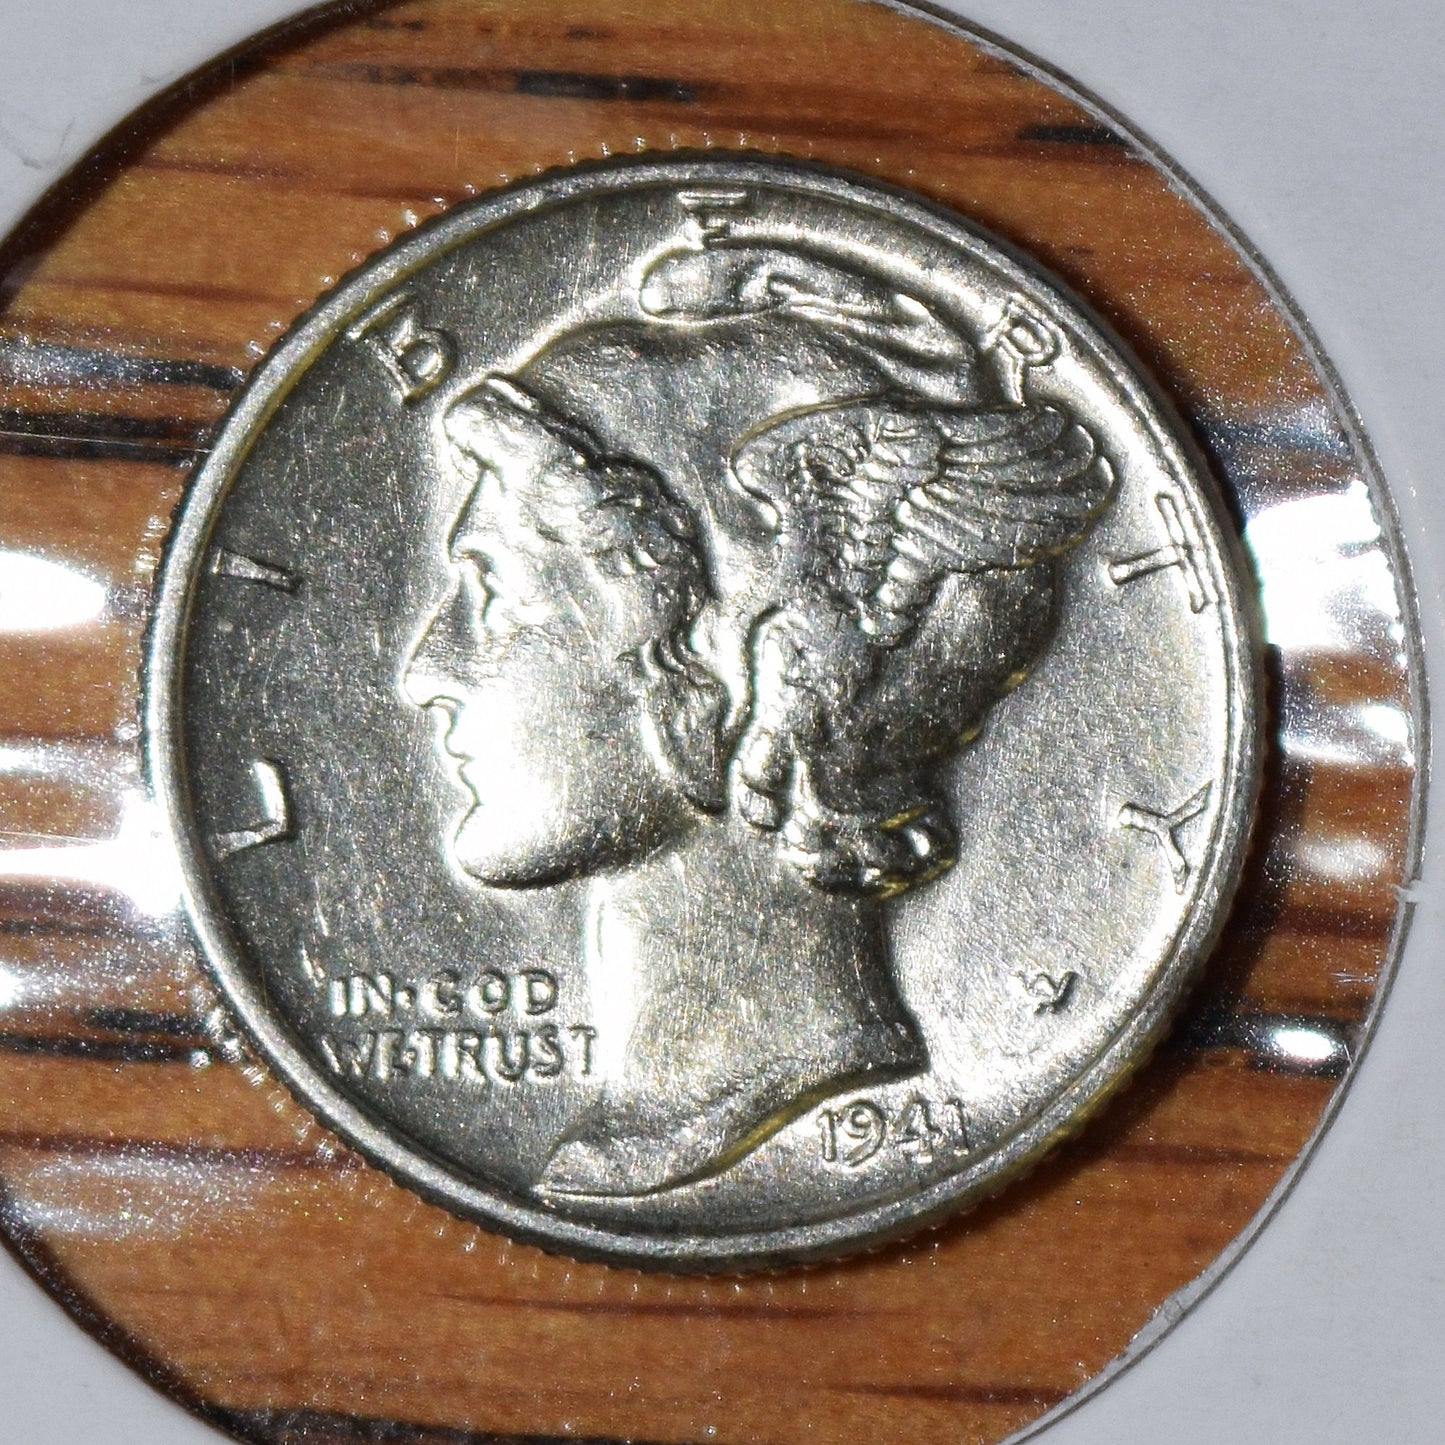 Brilliant, uncirculated, 1941 dime from the San Francisco mint!